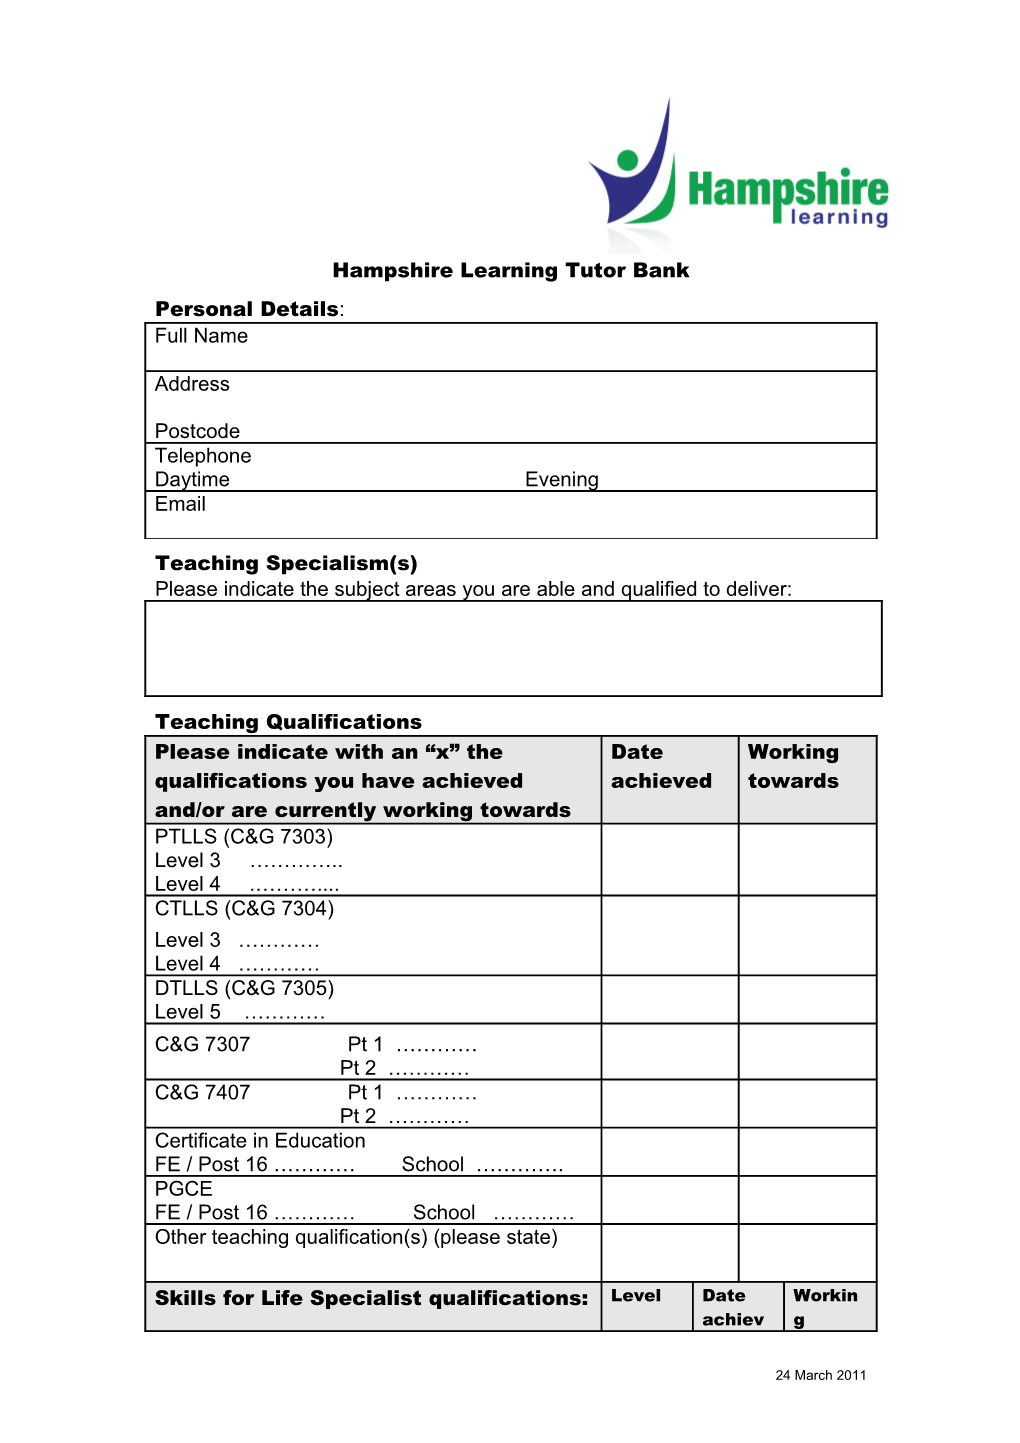 Hampshire Learning Maintains a Database of Experienced and Qualified Tutors in Hampshire